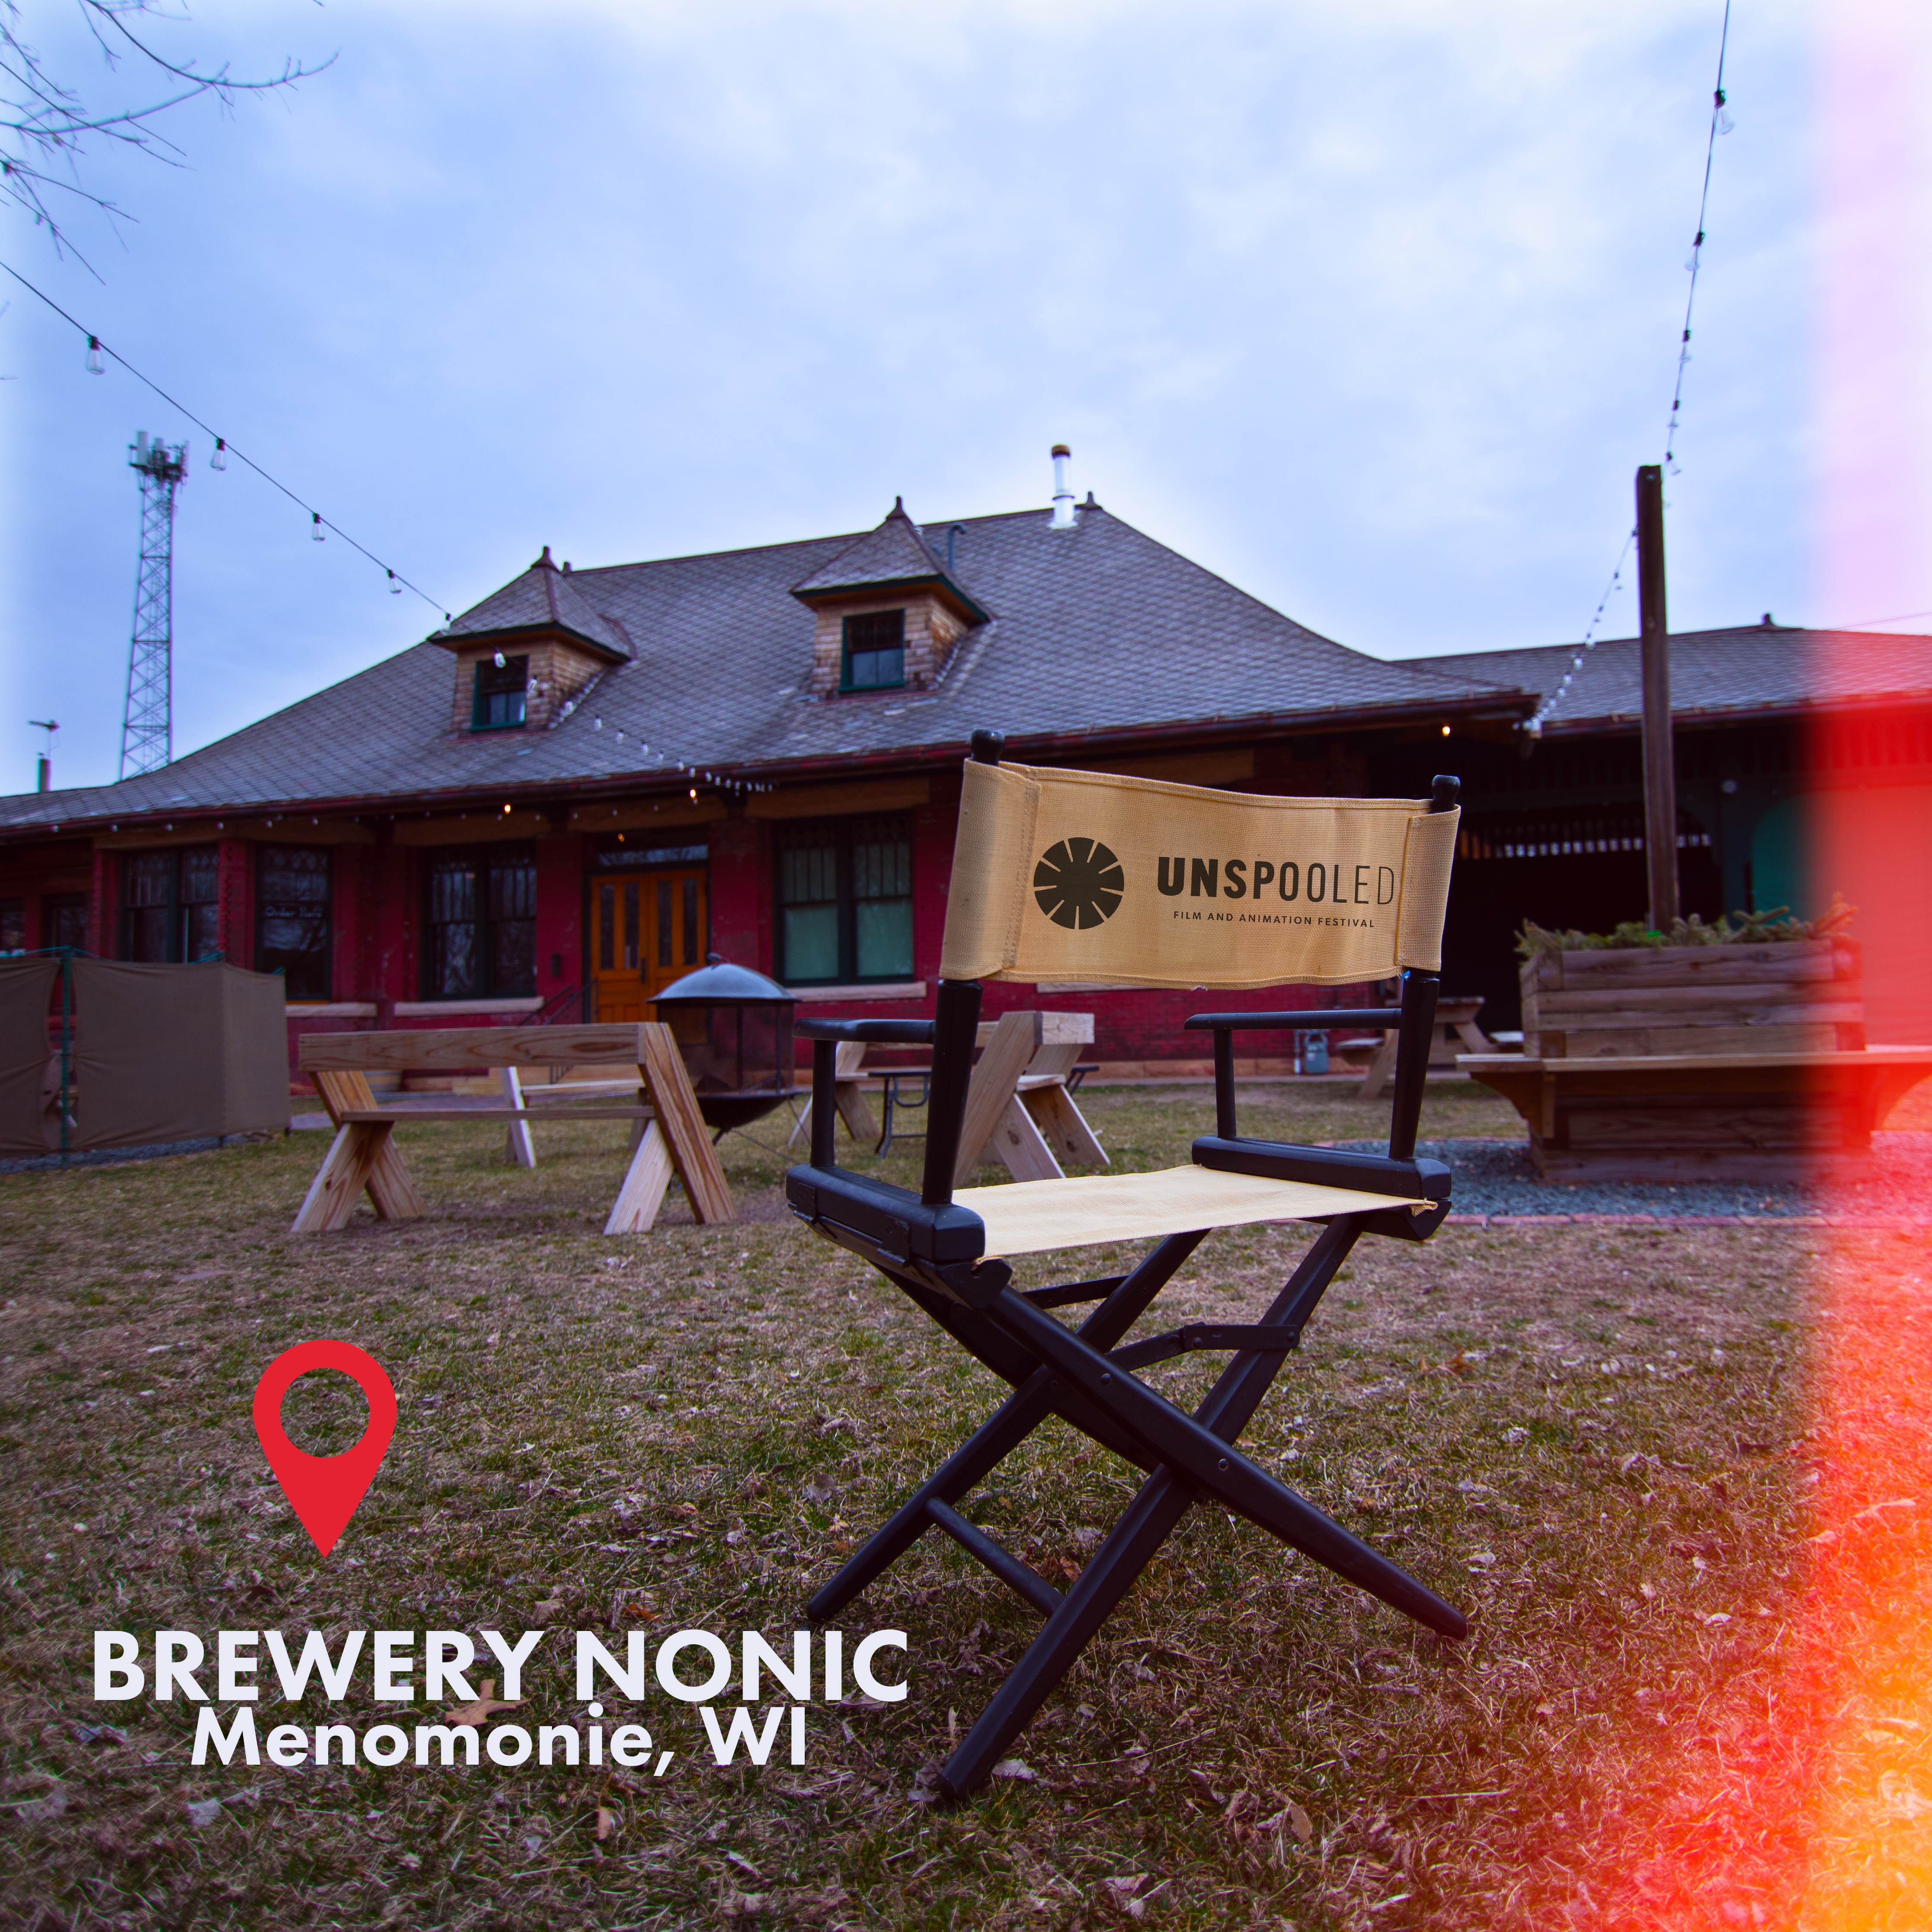 Direct Your Stay at Unspooled Film and Animation Festival - Directors chair sitting on the lawn of Brewery Nonic - facing the building and patio 